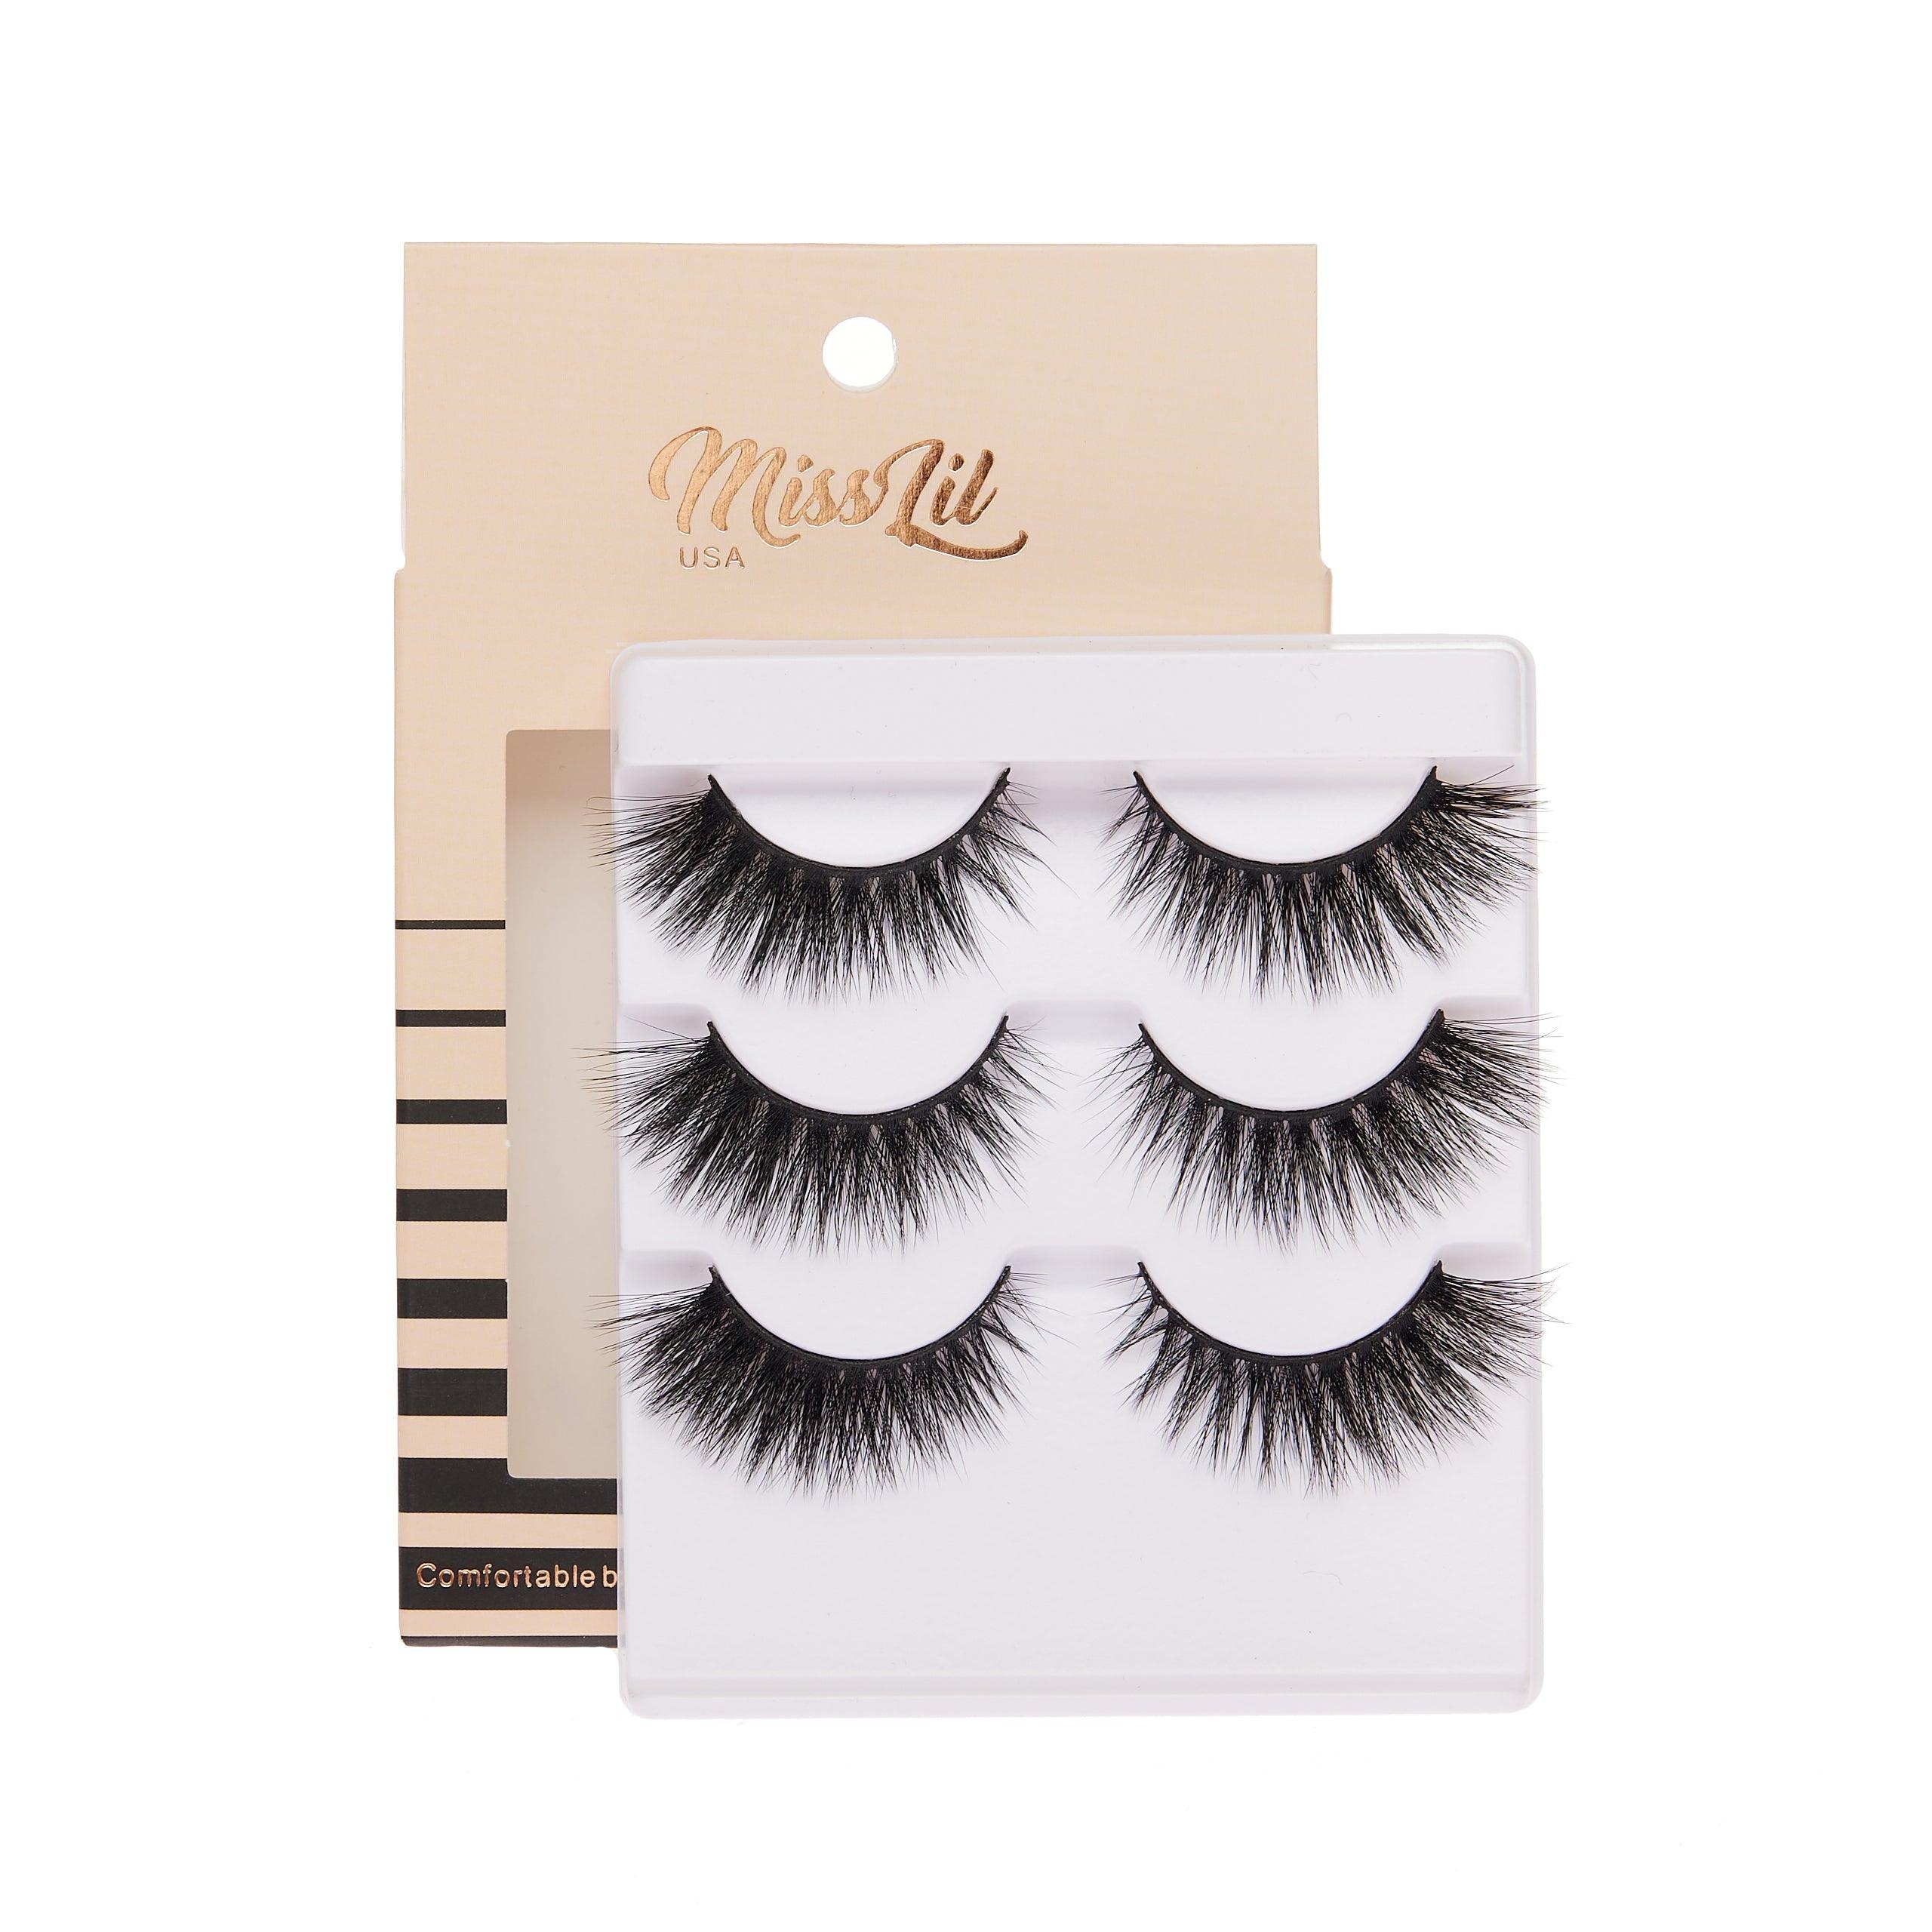 3-Pair Faux 9D Mink Eyelashes - Luxury Collection #23 - Pack of 23 - Miss Lil USA